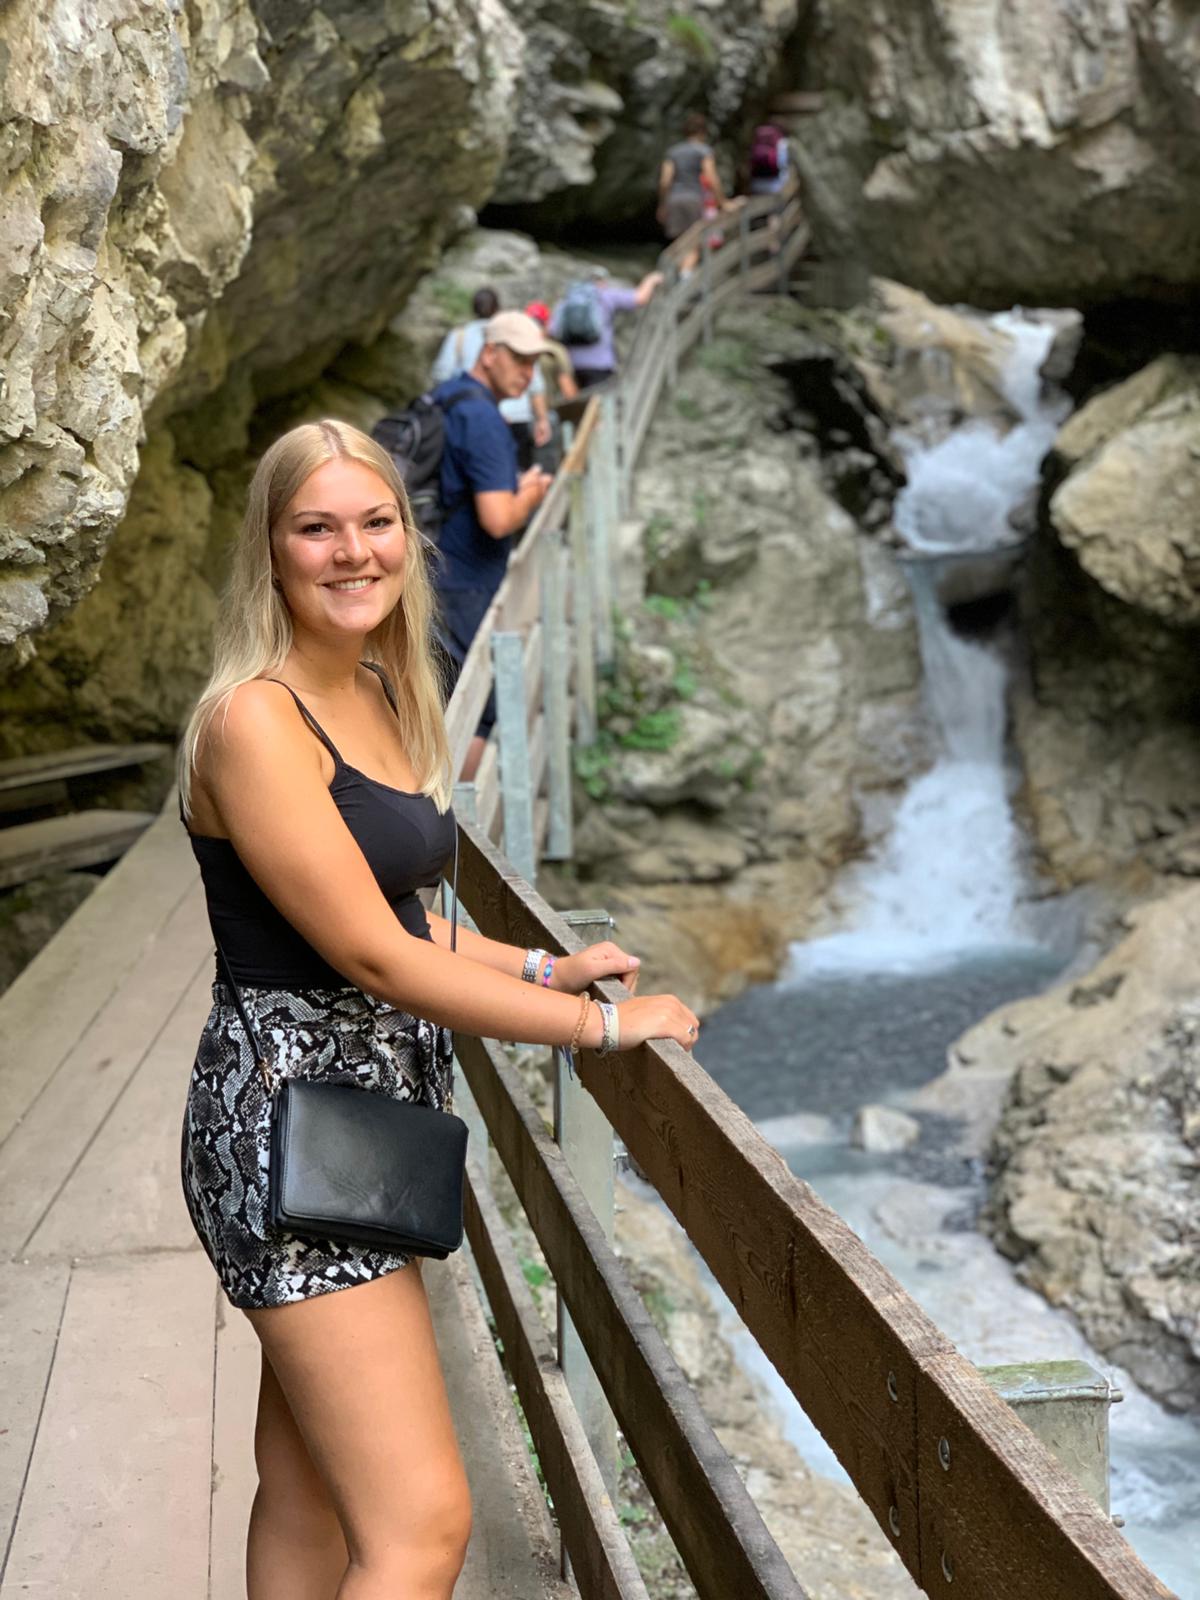 Girl poses in a gorge in austria